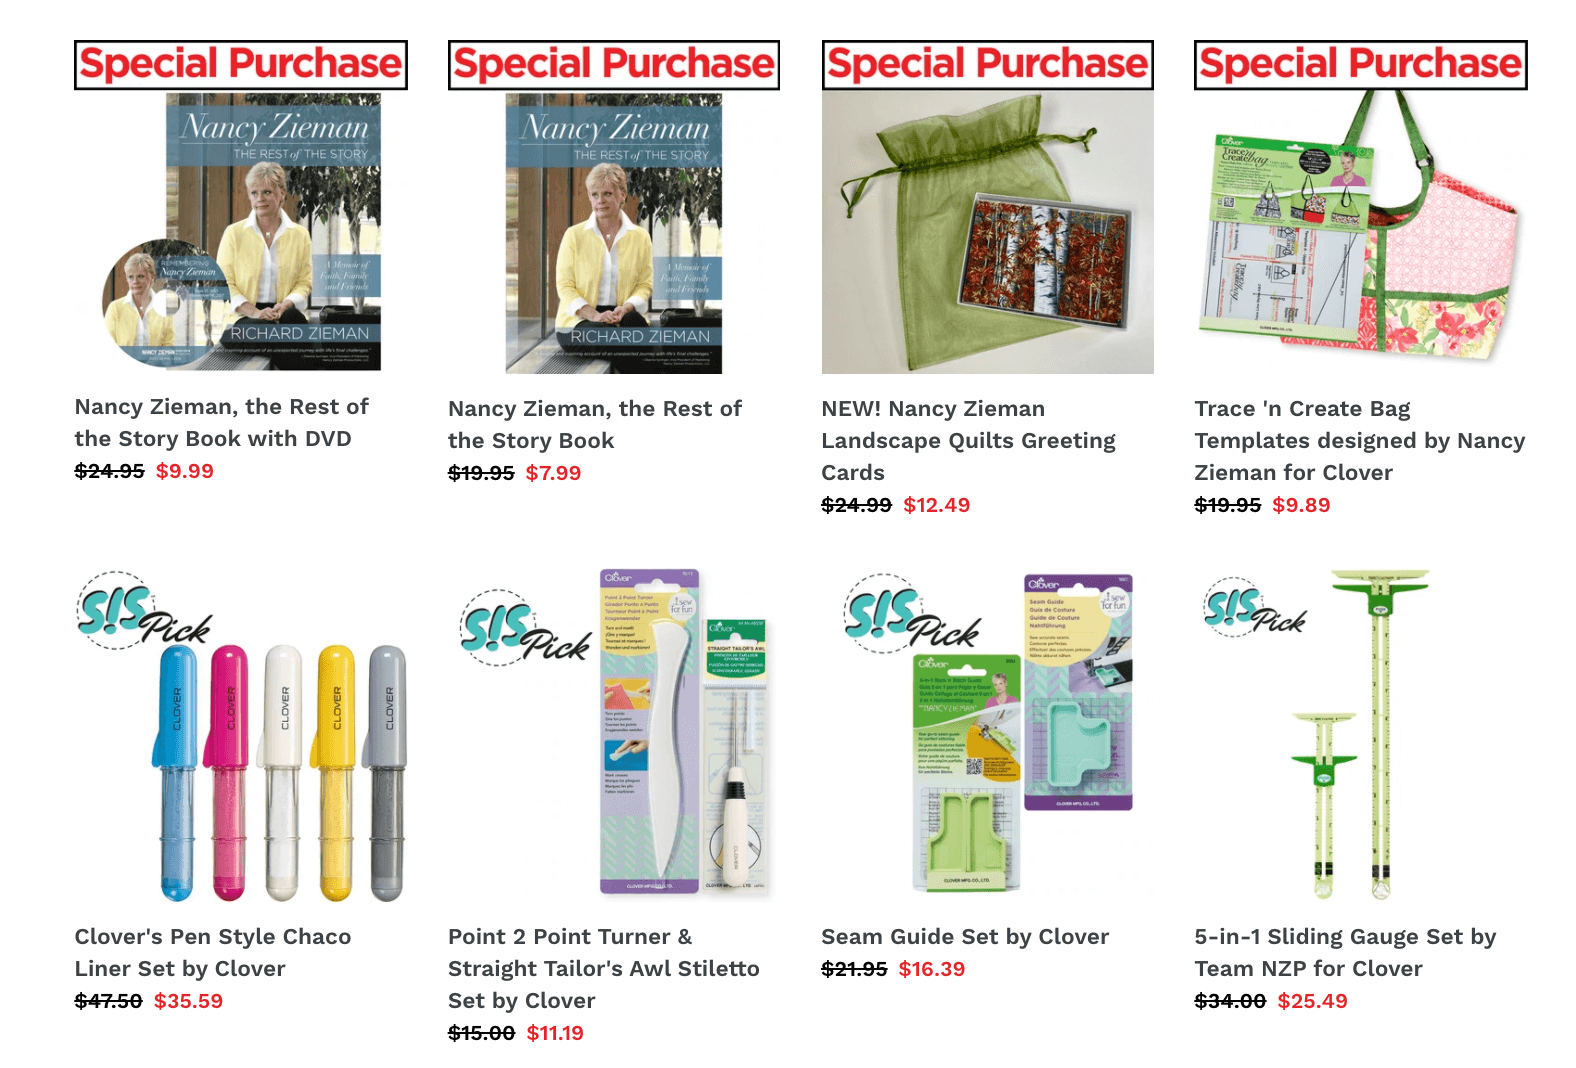 Shop the Semi Annual Clearance and Stock Up Sale at Nancy Zieman Productions at ShopNZP.com 7.12.19 AM